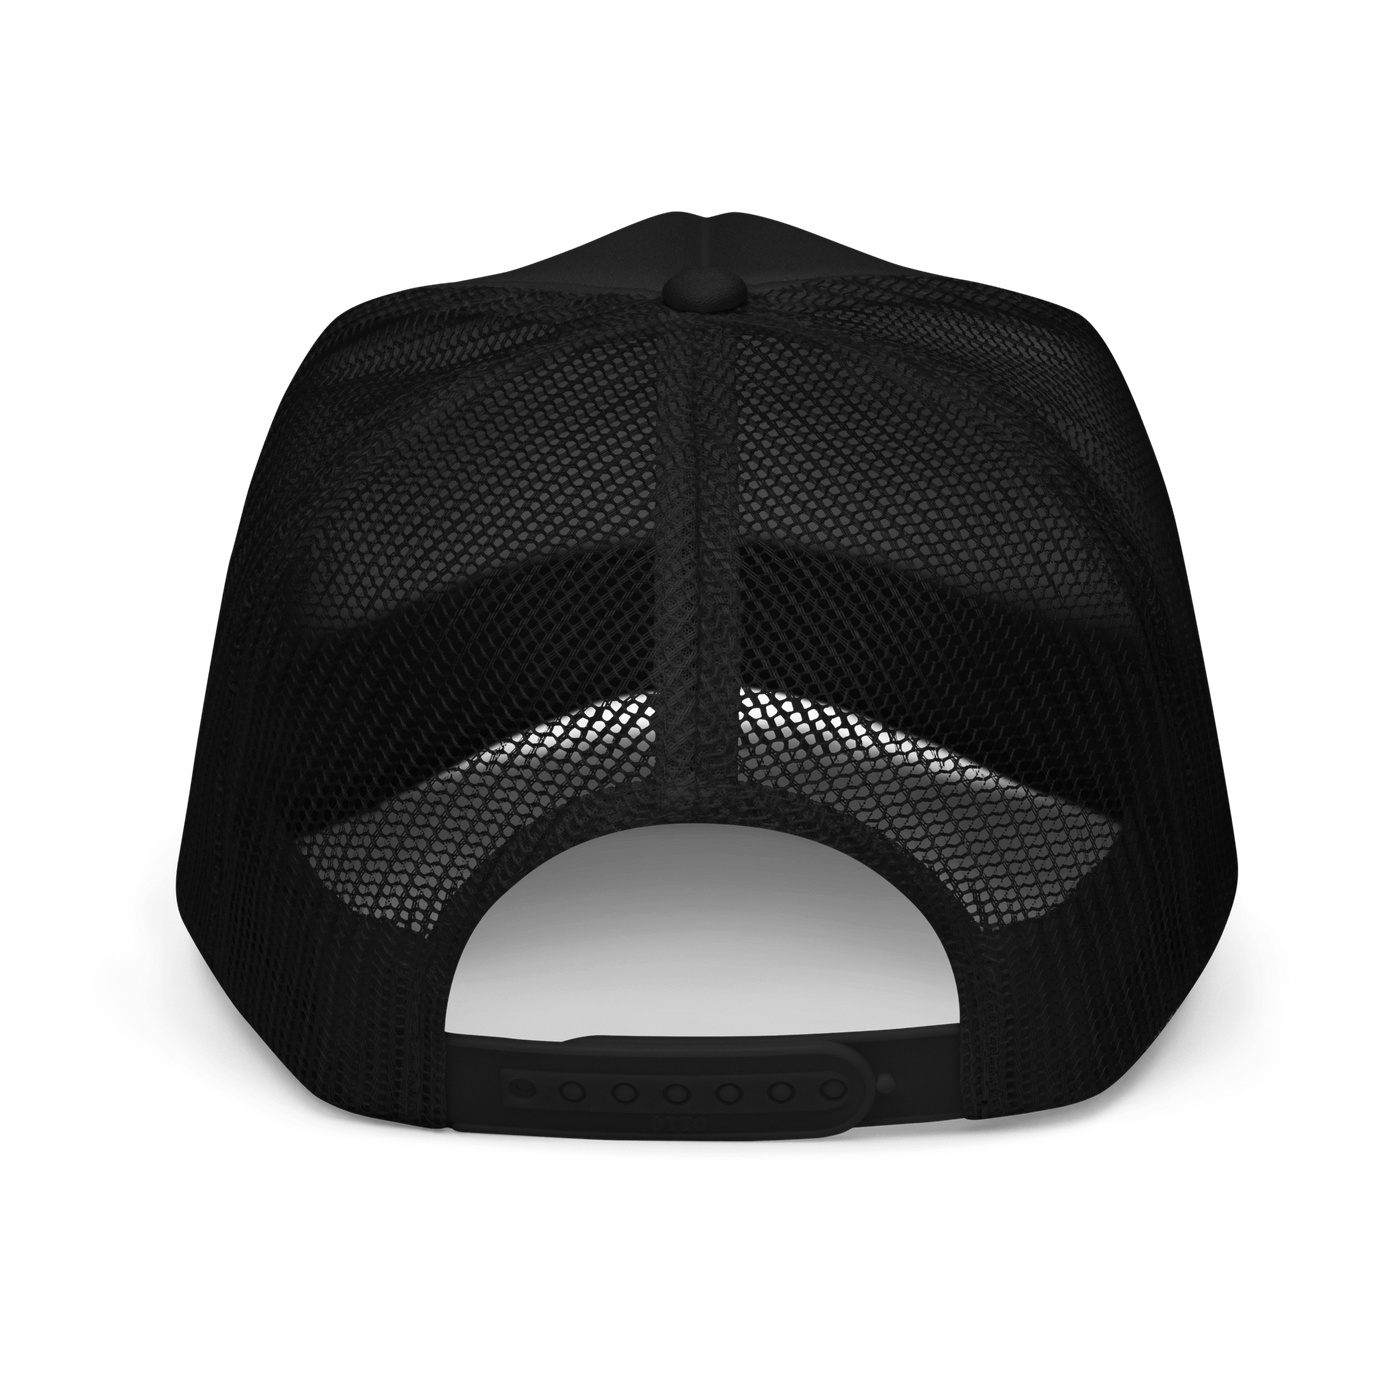 Printful| May the Fourth Trucker Hat Hat 